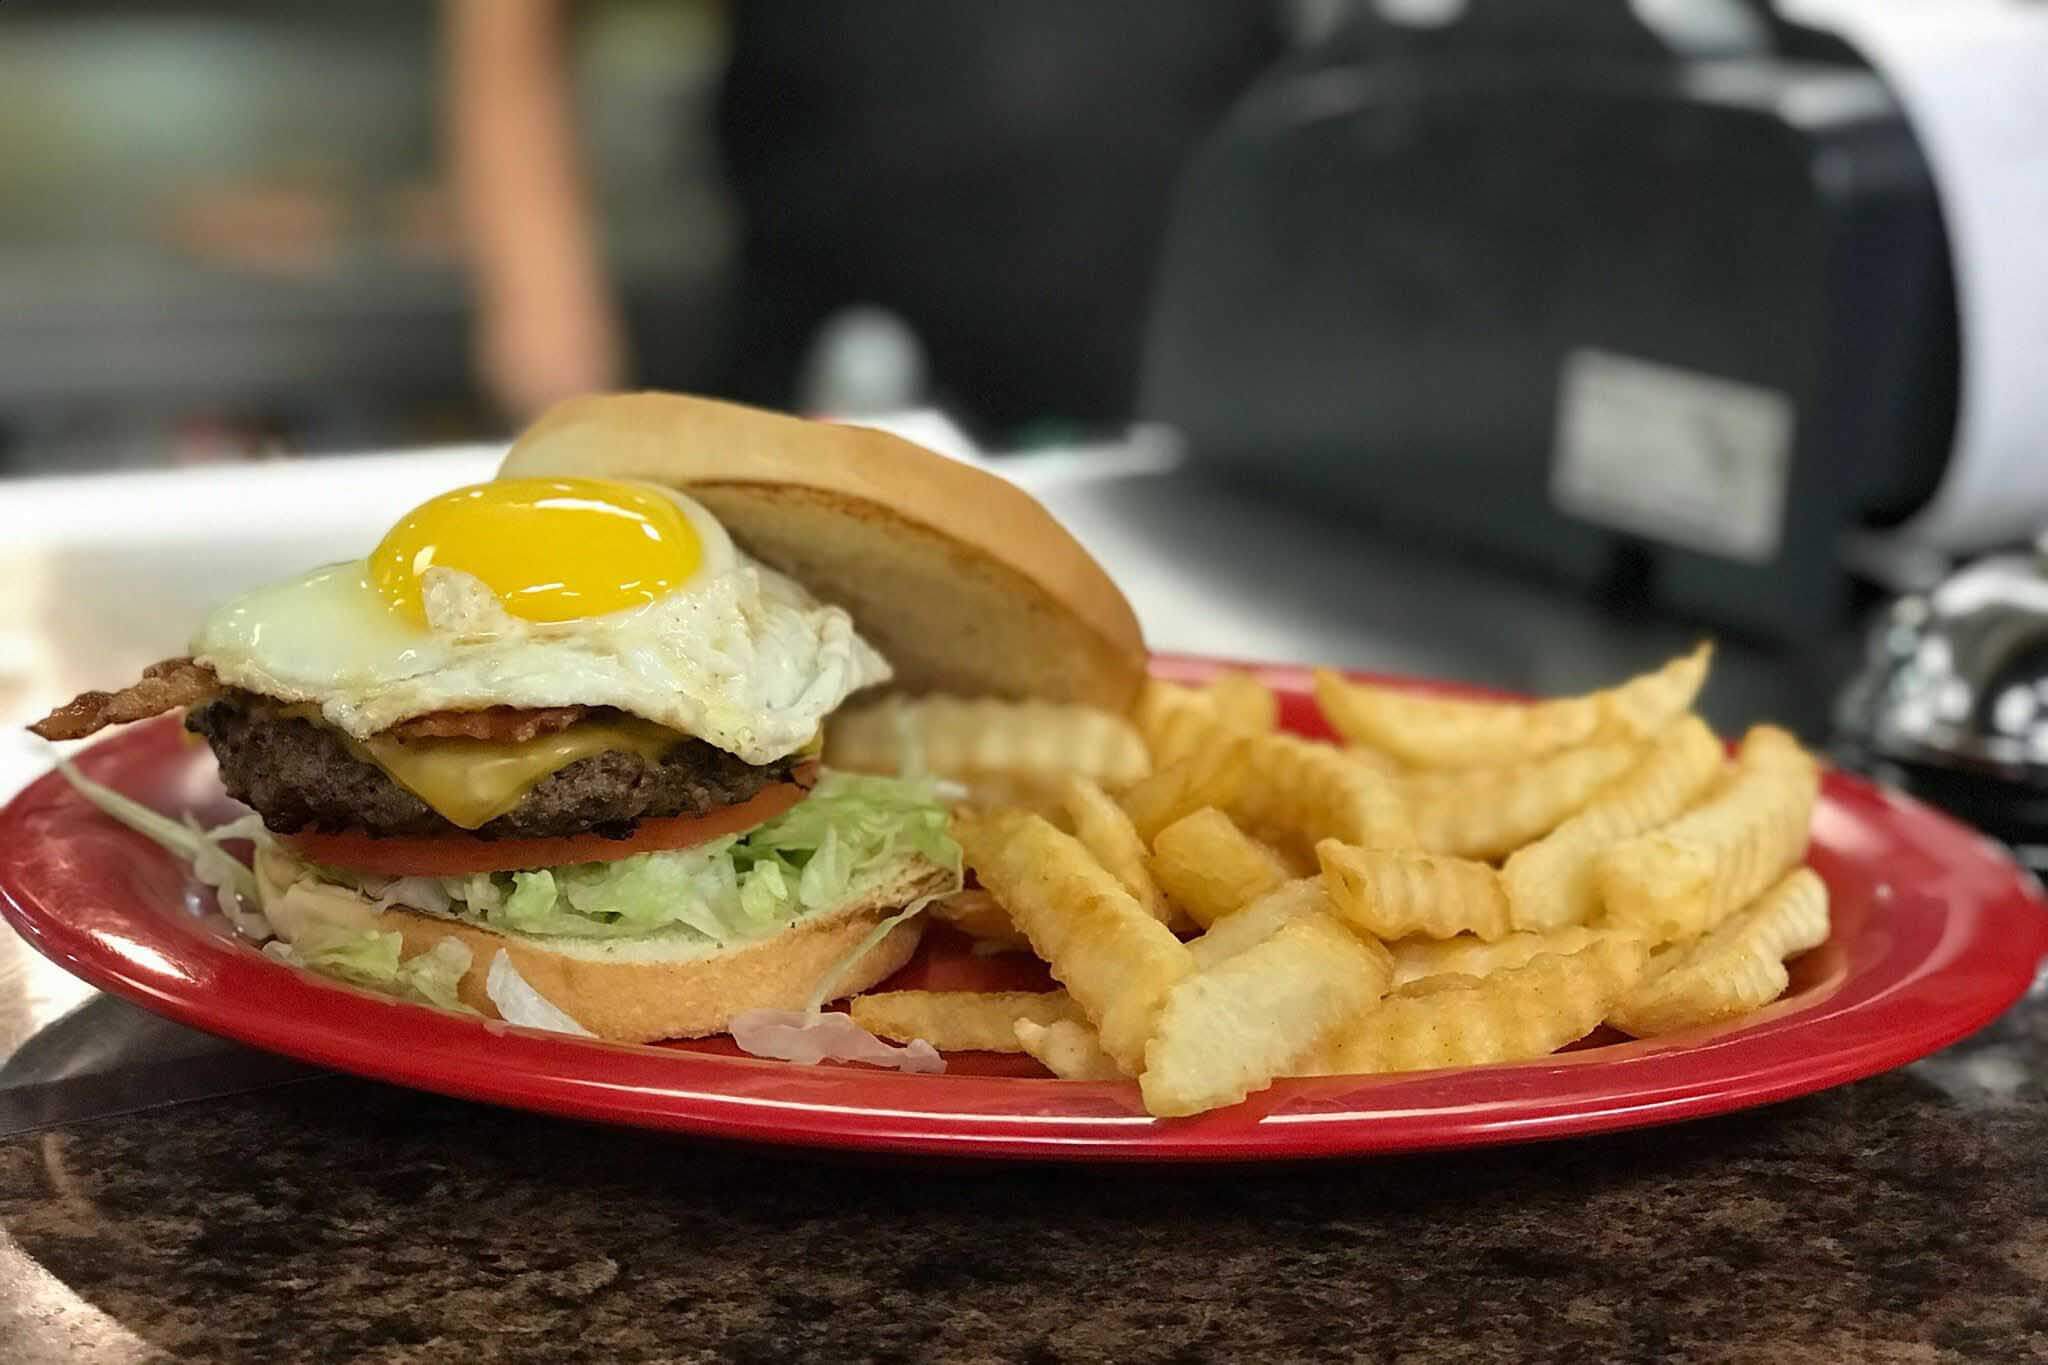 Cheeseburger with an egg on top and a side of fries. 